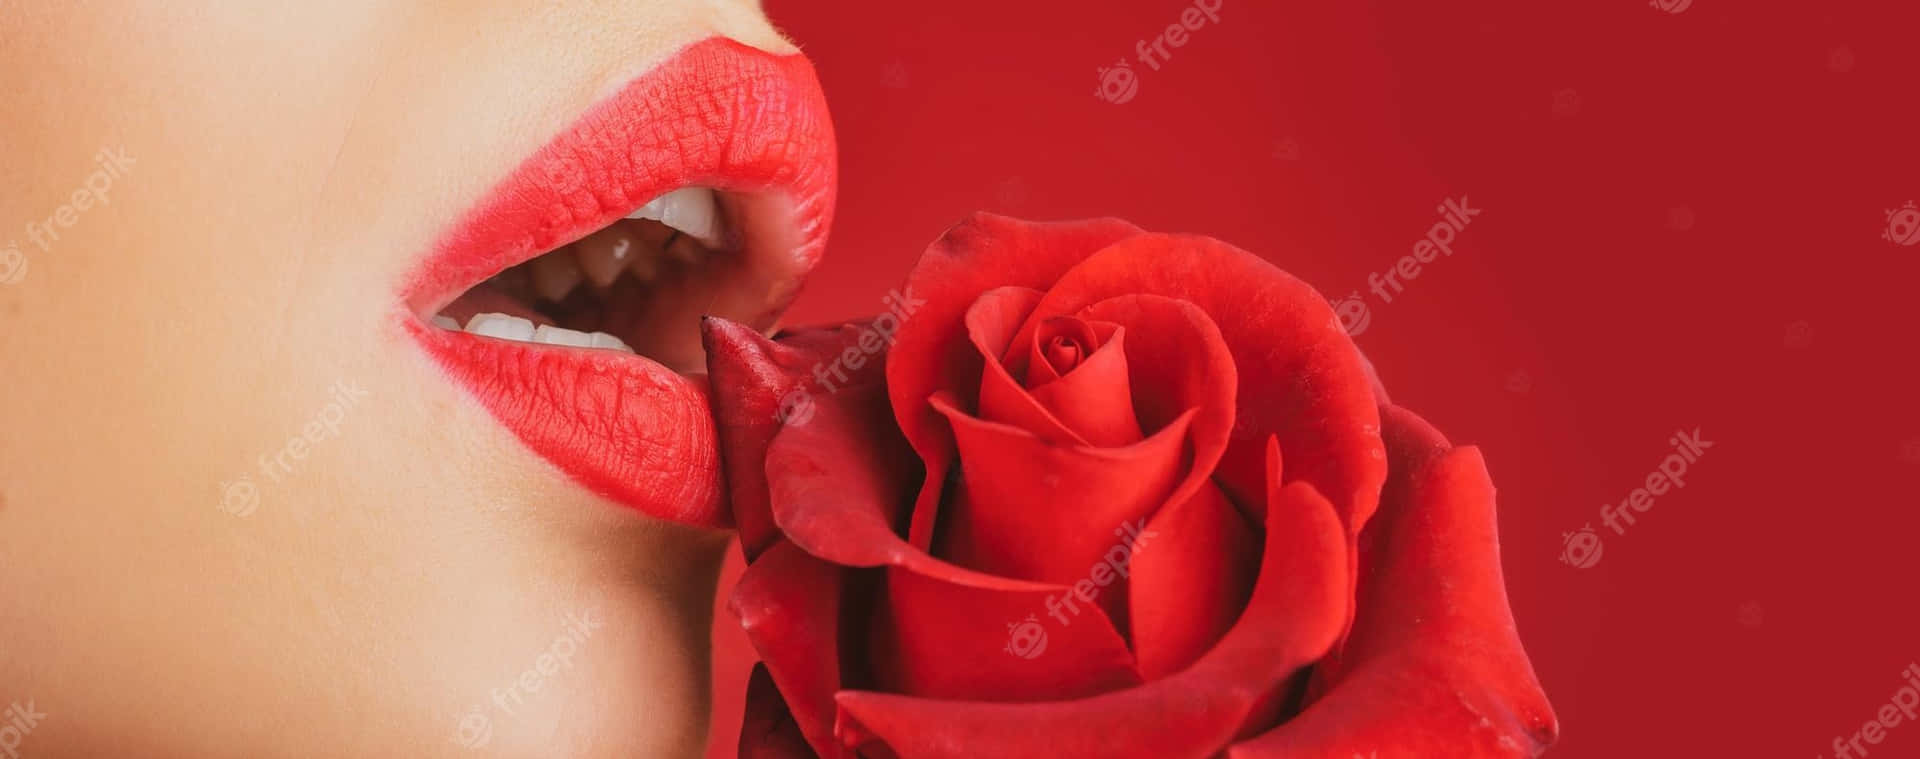 Oral Lips With Rose Wallpaper